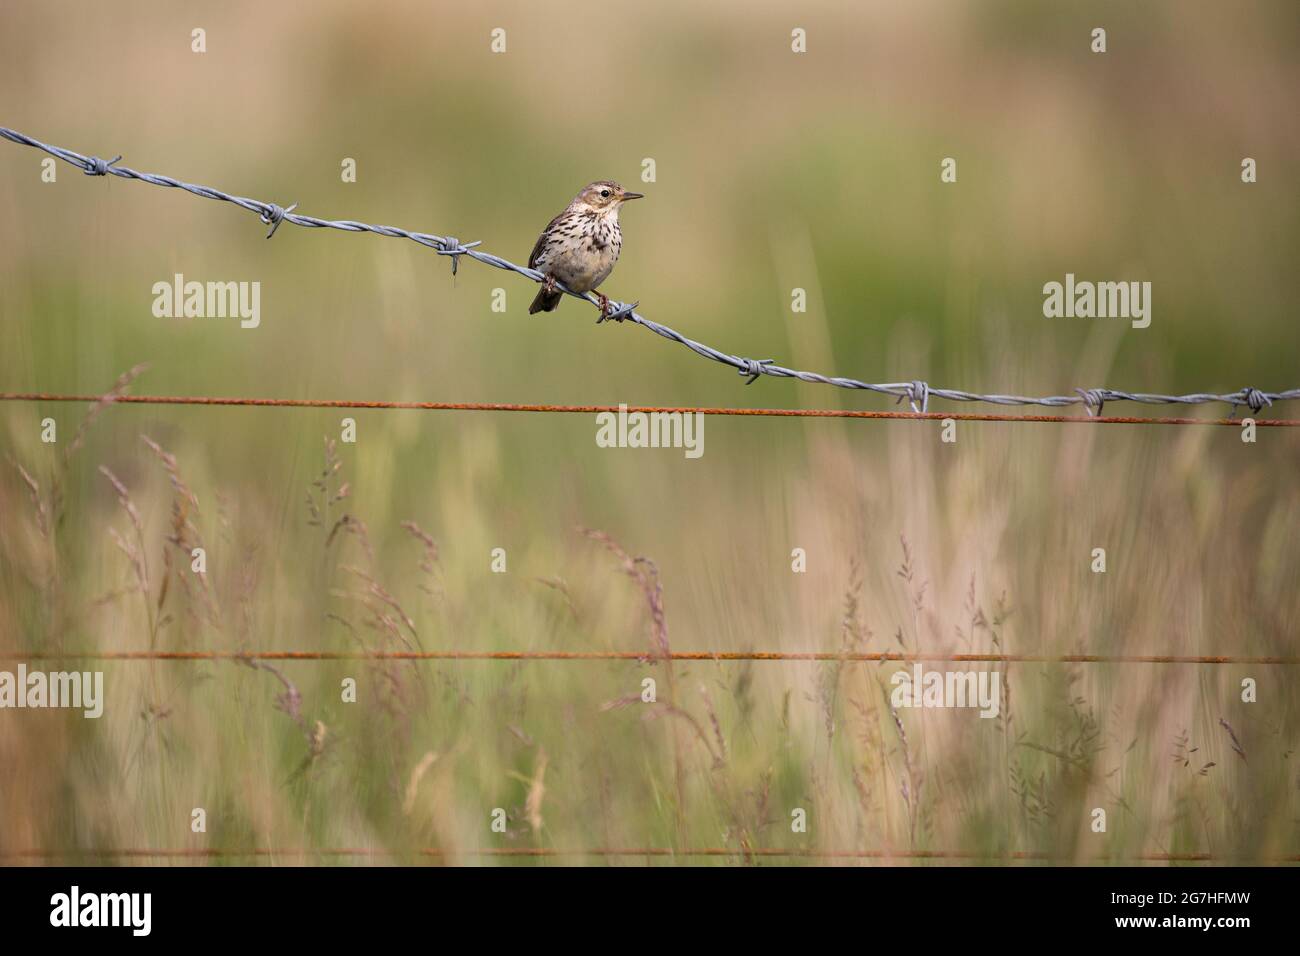 Skylark perched on barbed wire. Stock Photo